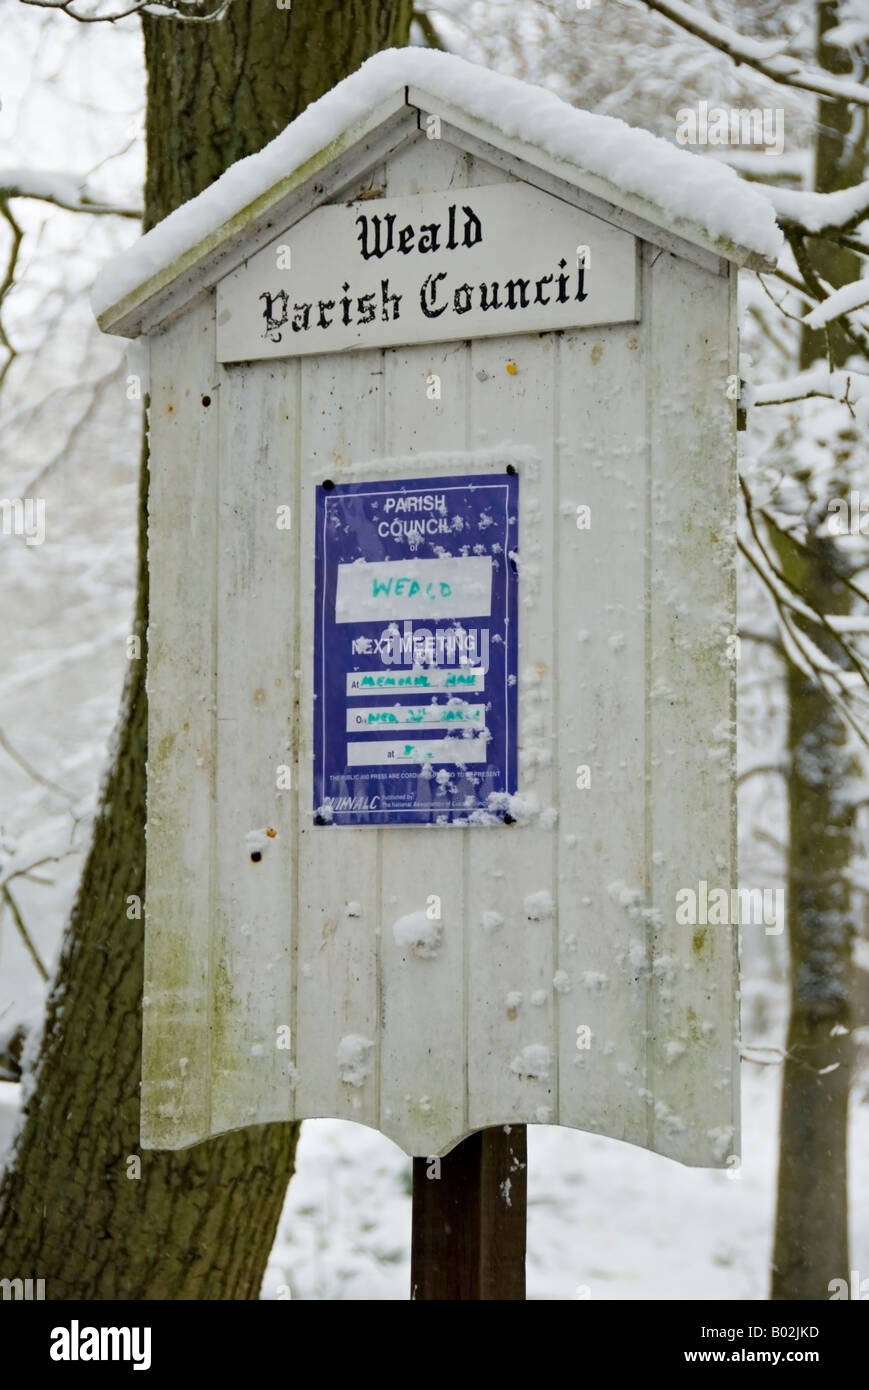 Weald parish council noticeboard in the snow Stock Photo